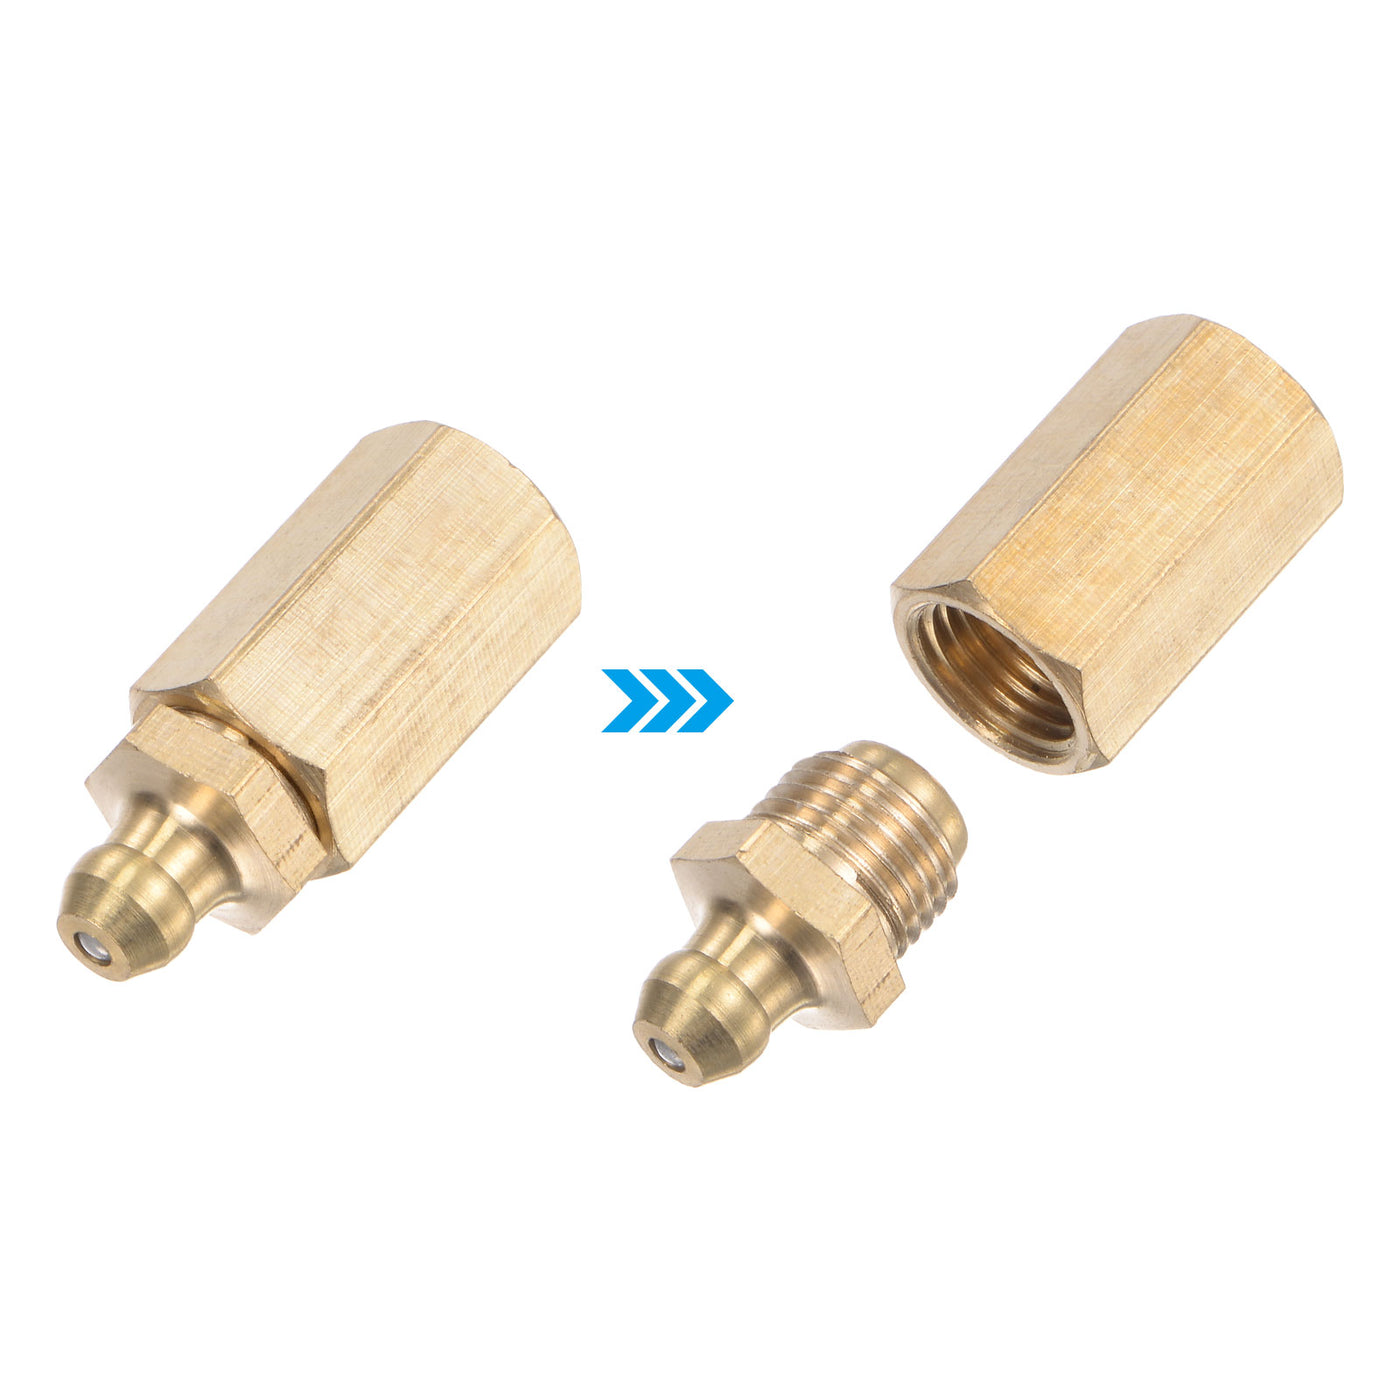 uxcell Uxcell Brass Straight Hydraulic Grease Fitting Accessories M10 x 1mm Thread, 2Pcs